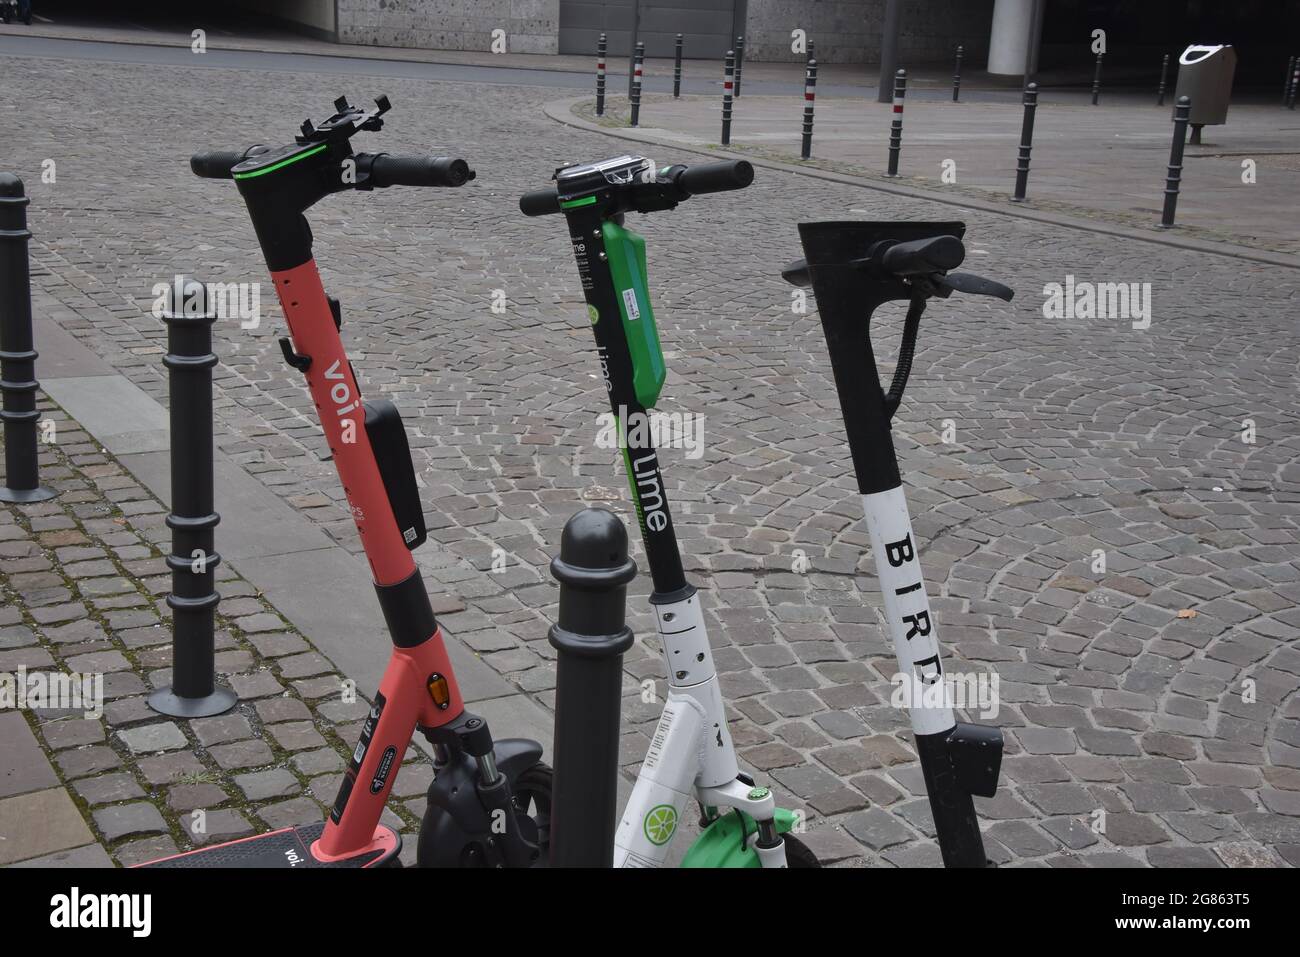 Cologne, Germany. 16th July, 2021. Rental e-scooters from Voi, Bird and Lime  are on the sidewalk. Credit: Horst Galuschka/dpa/Alamy Live News Stock  Photo - Alamy